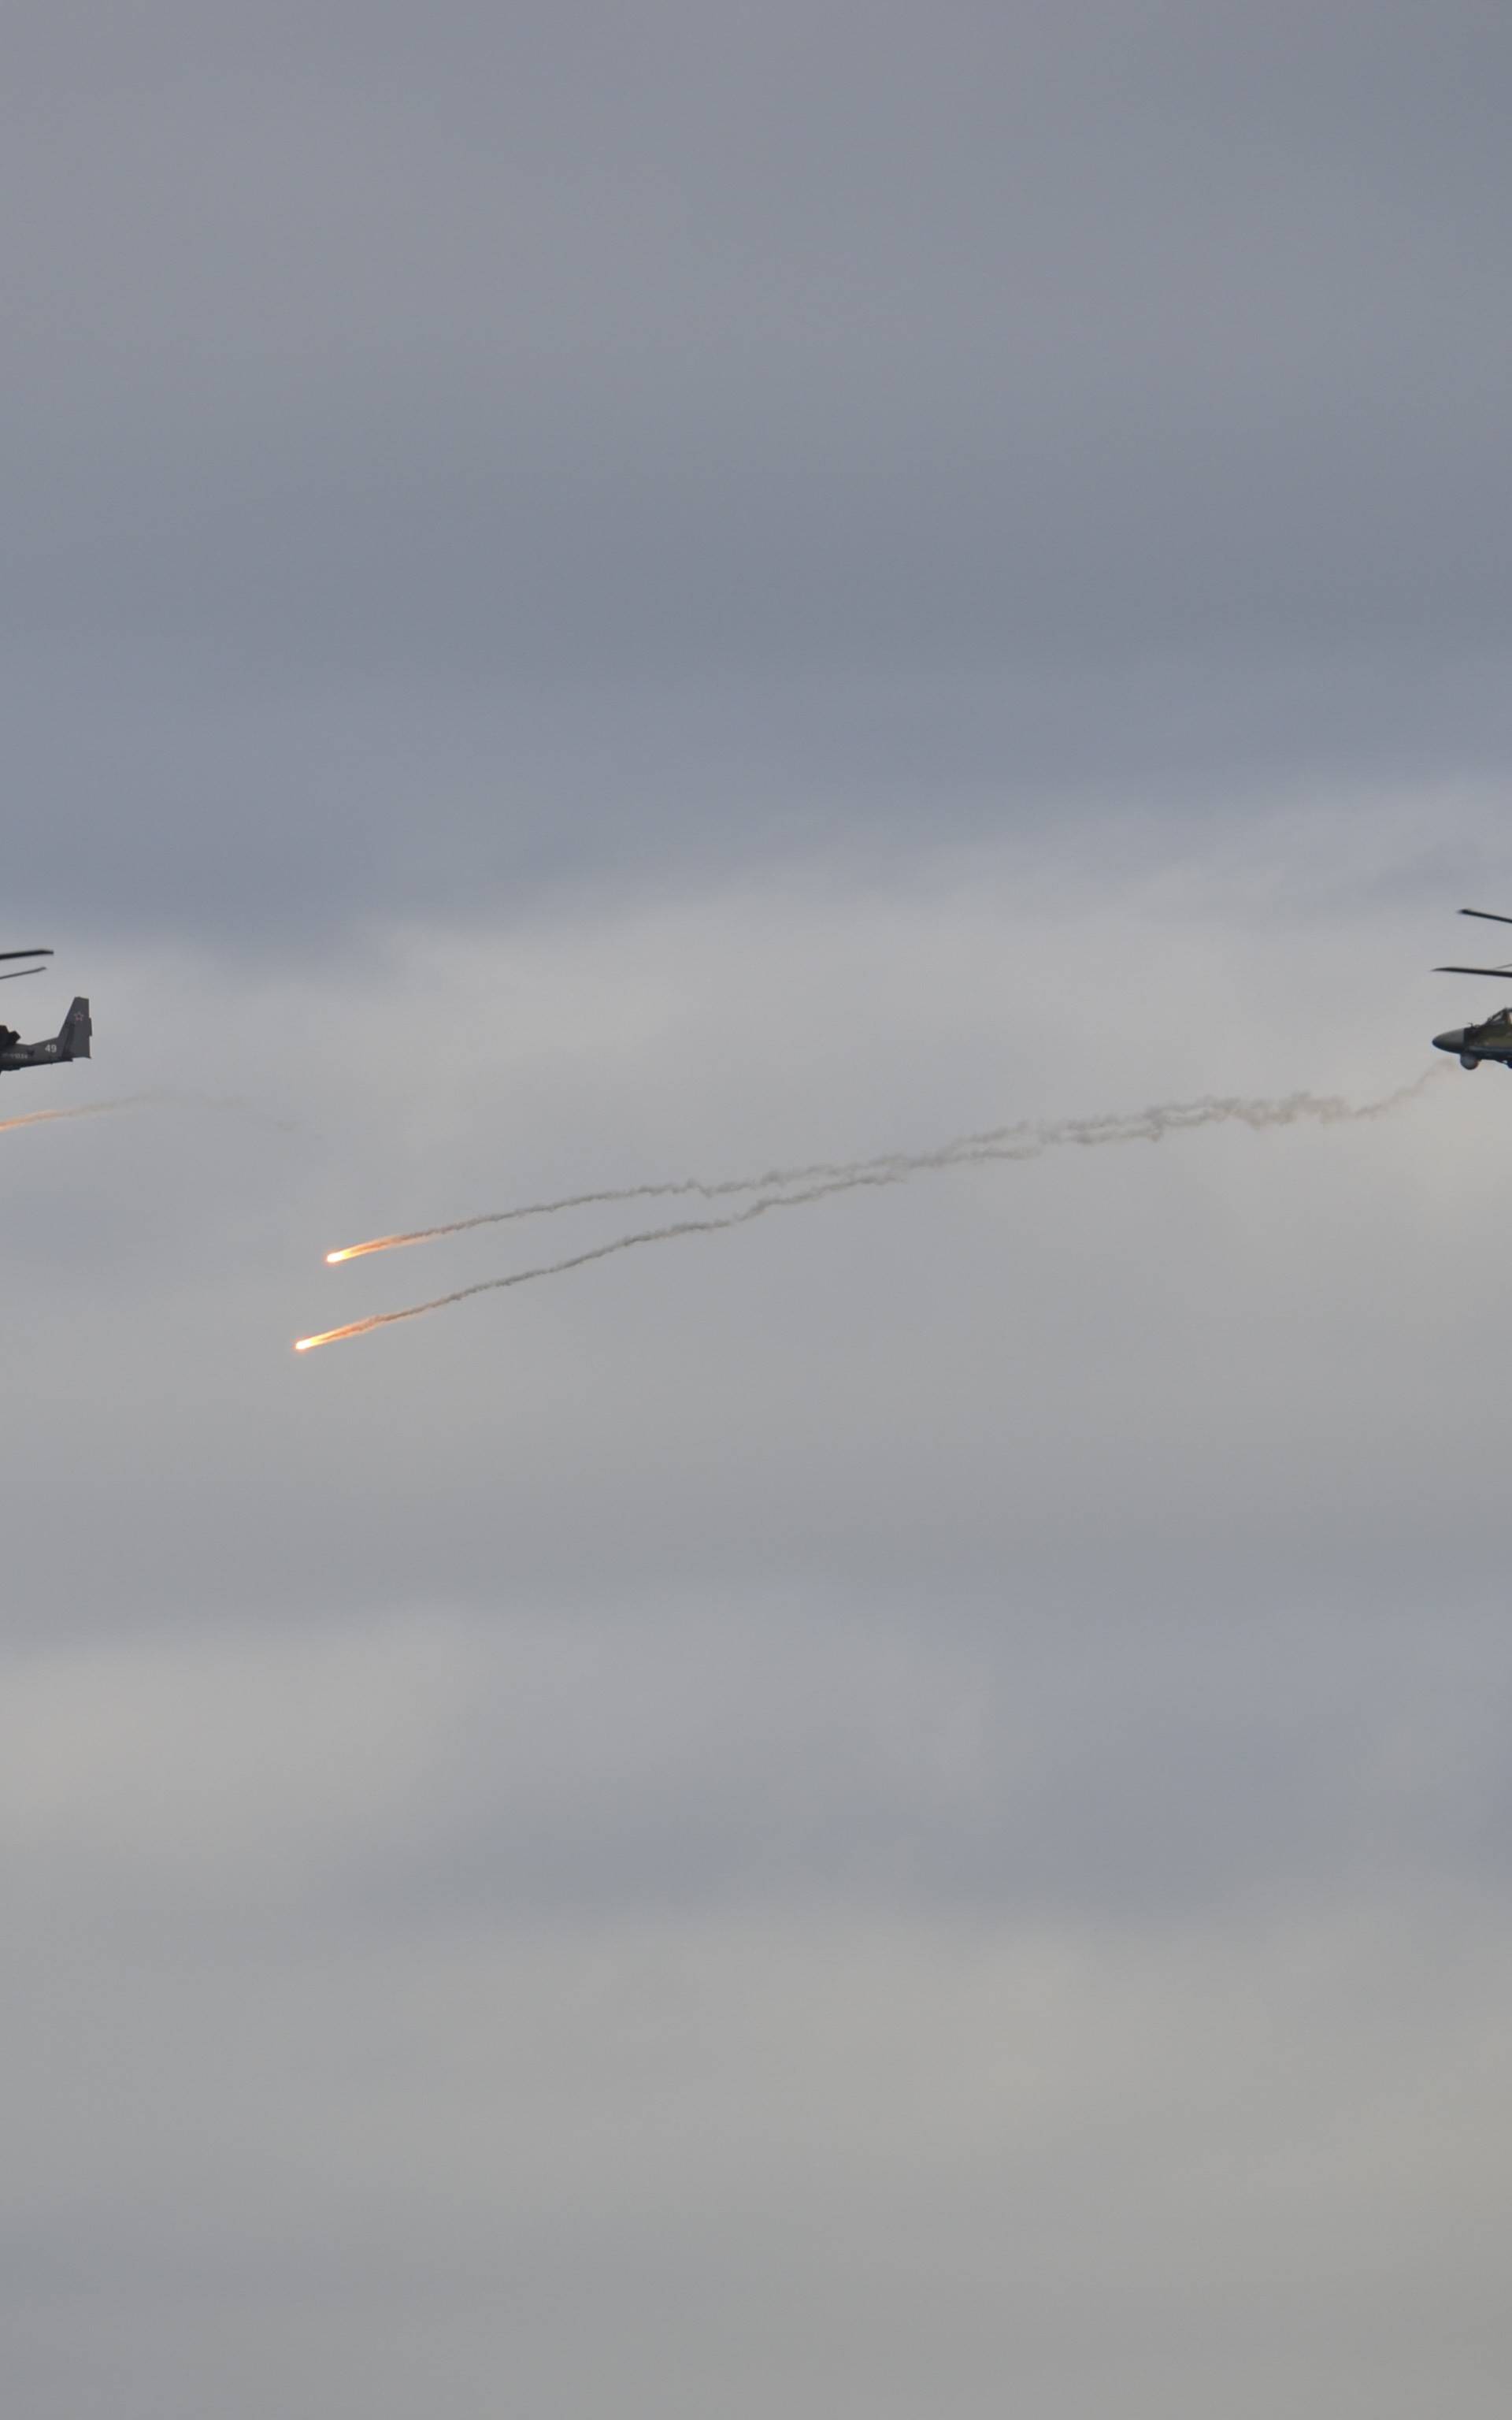 A view shows helicopters during the Zapad-2017 war games in Belarus